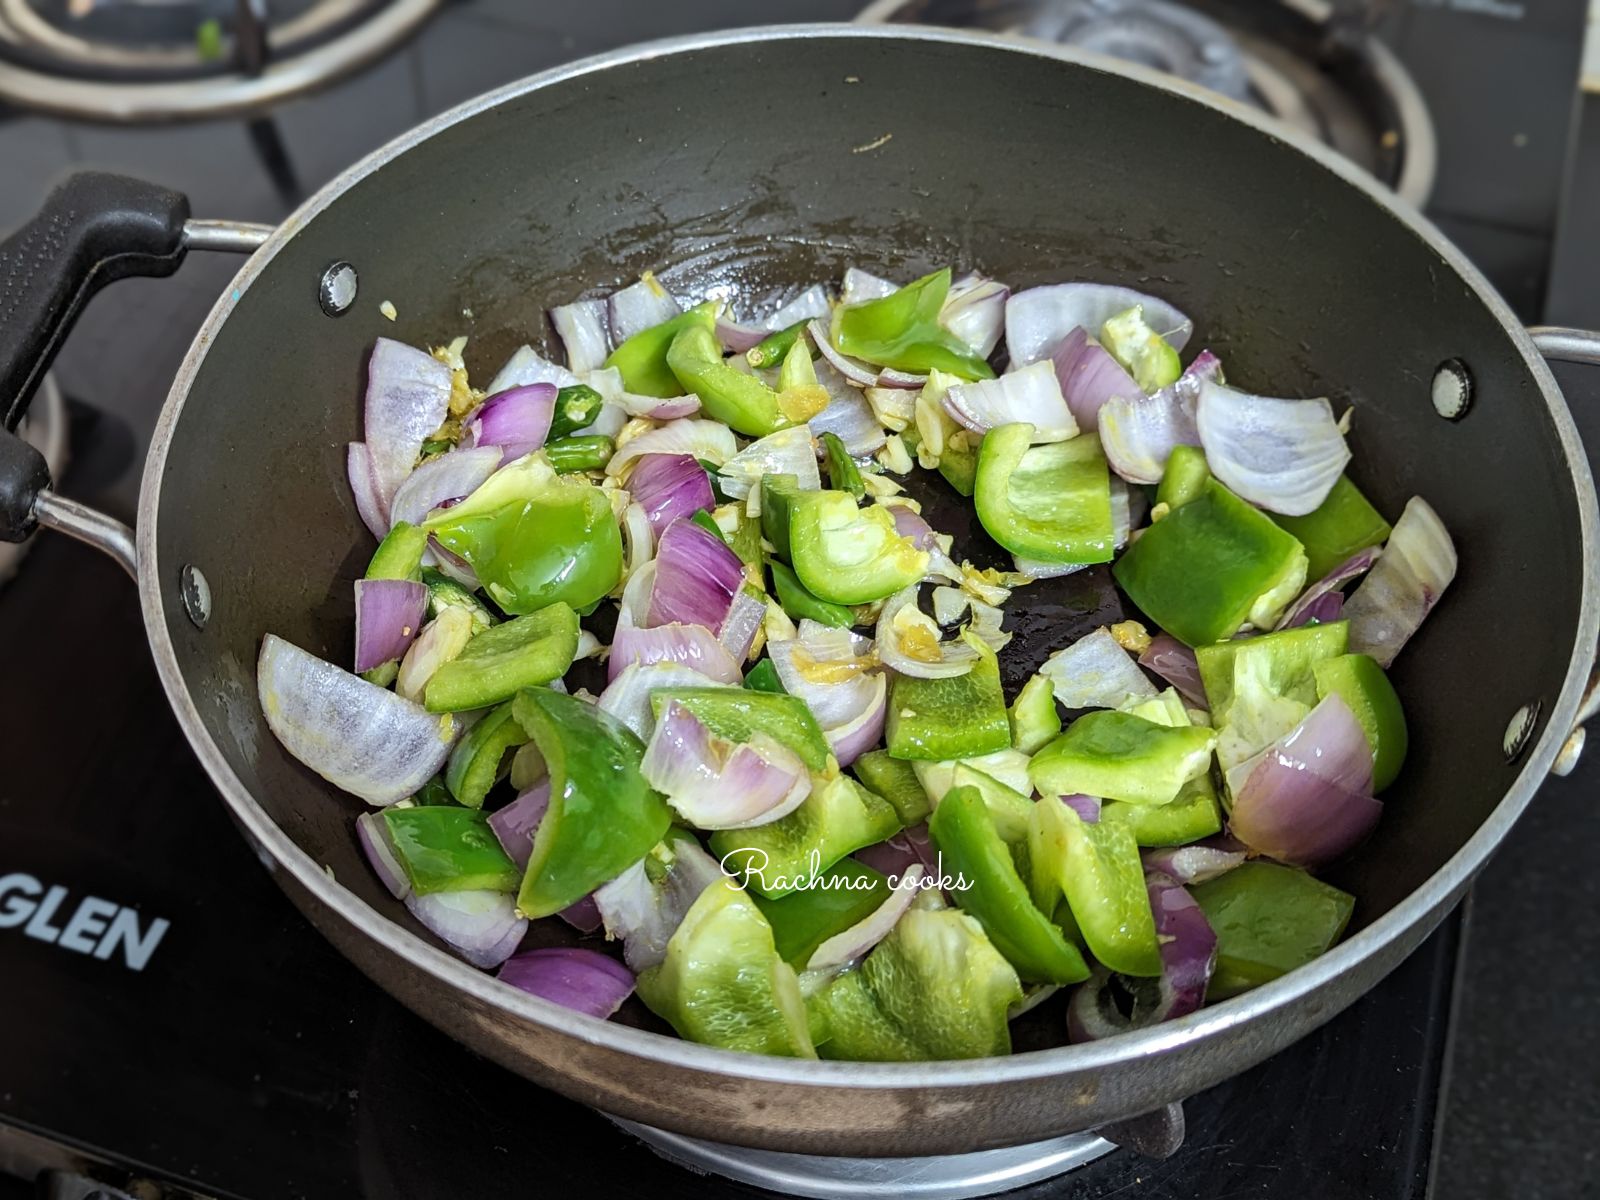 Ginger, garlic, green pepper and onion in a pan.